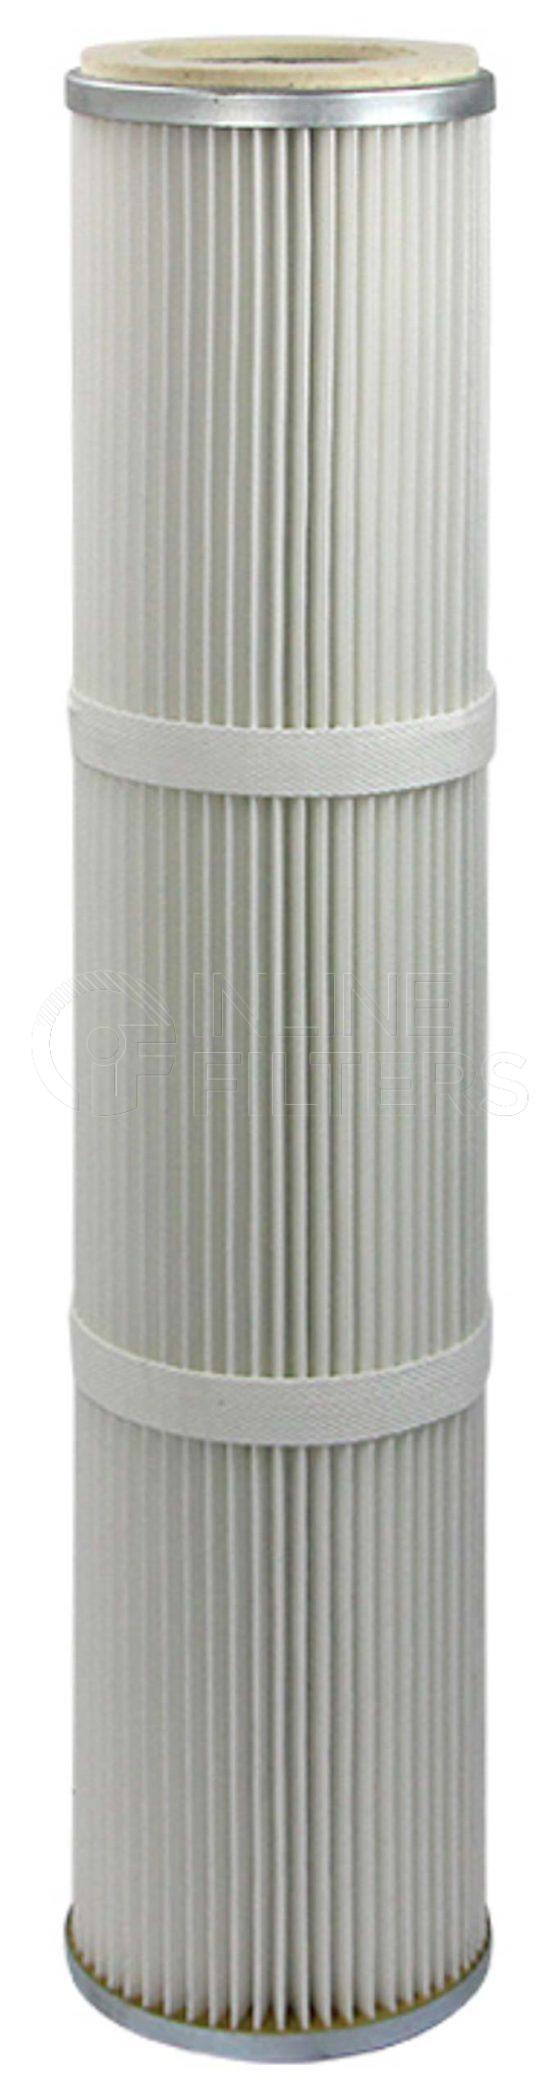 Inline FA10135. Air Filter Product – Cartridge – Round Product Air filter product